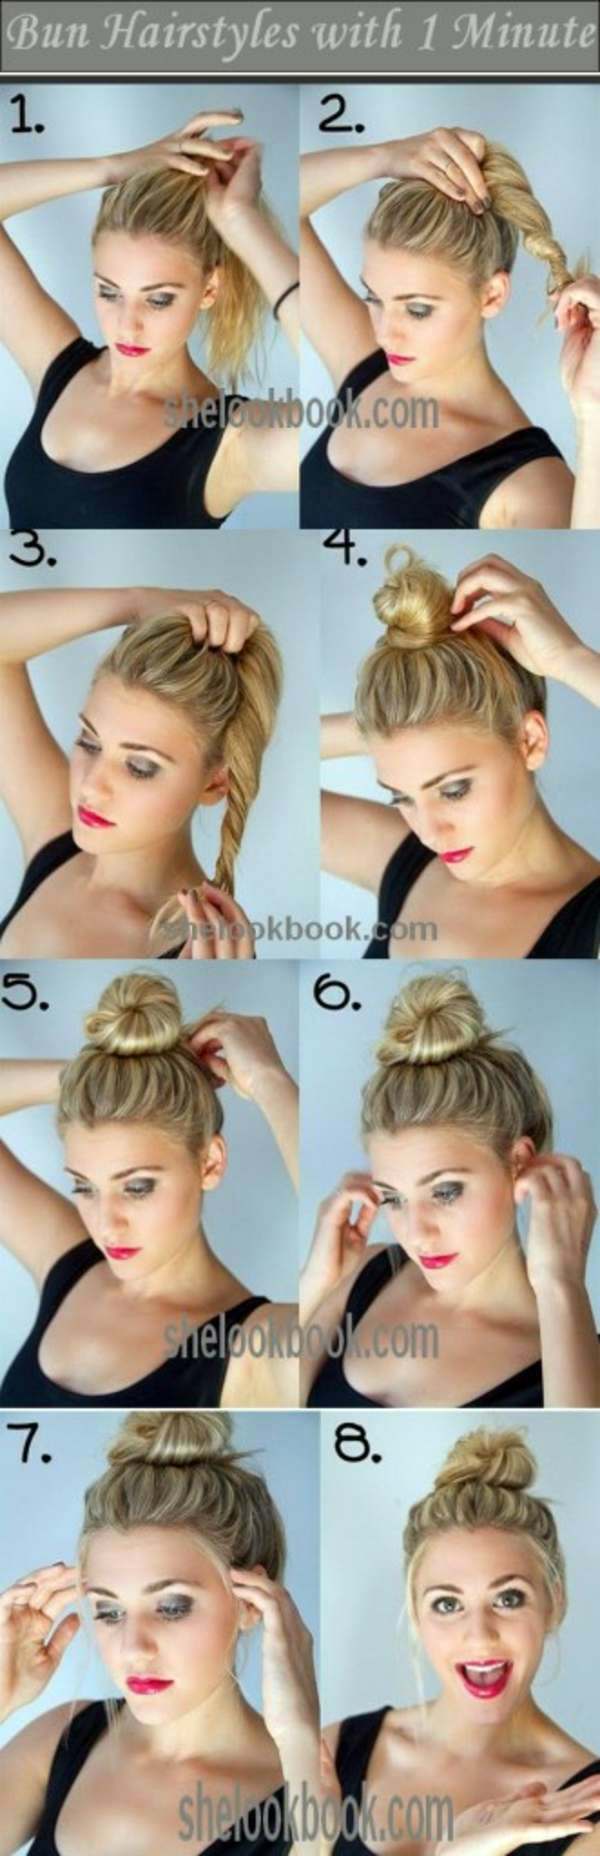 Quick and easy going DIY trendy hairstyles